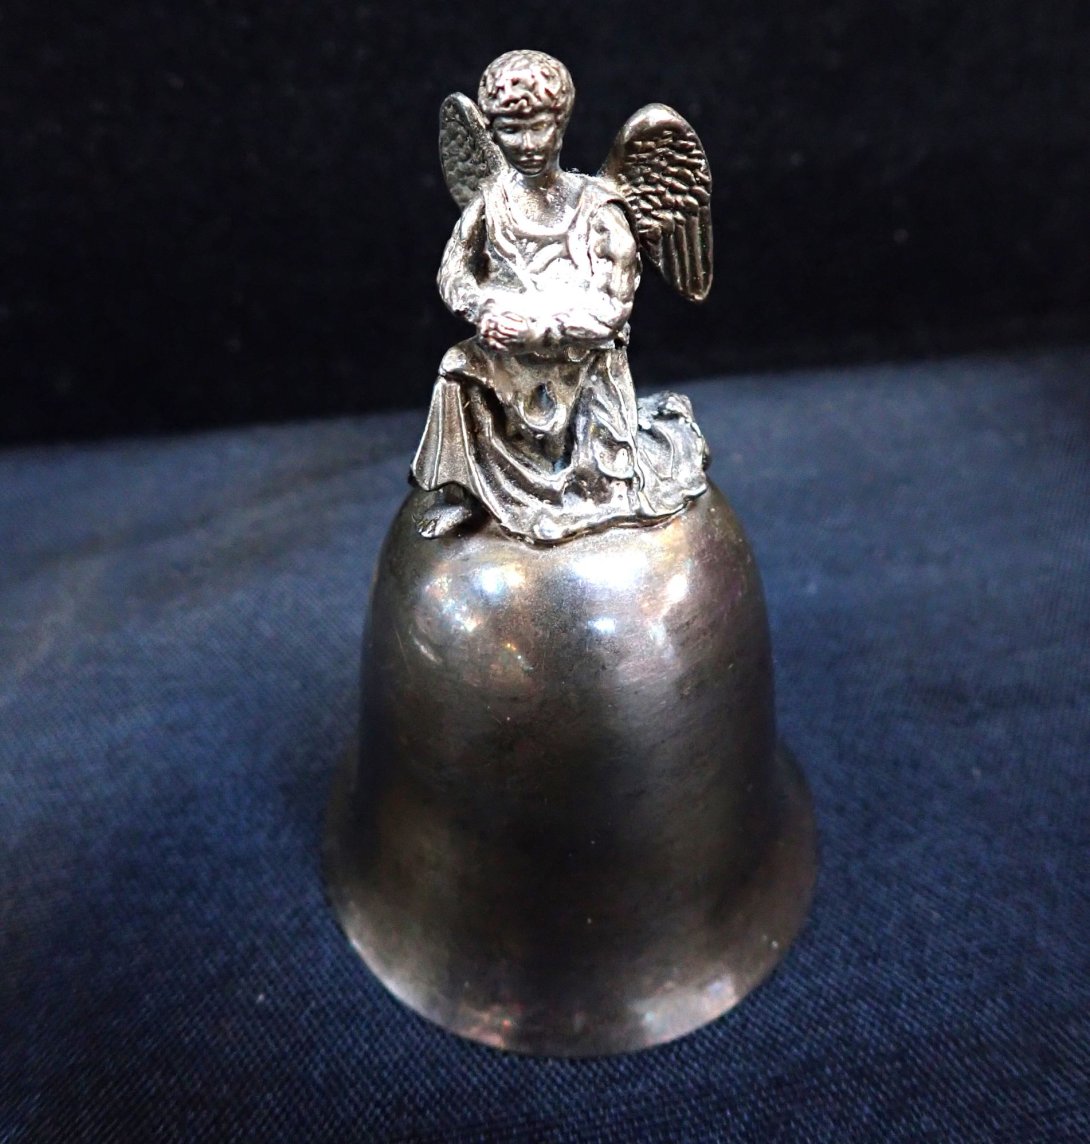 SILVER PLATED BELL "SHEFFIELD 1975" WITH AN ANGEL SEATED ON TOP - Image 2 of 3